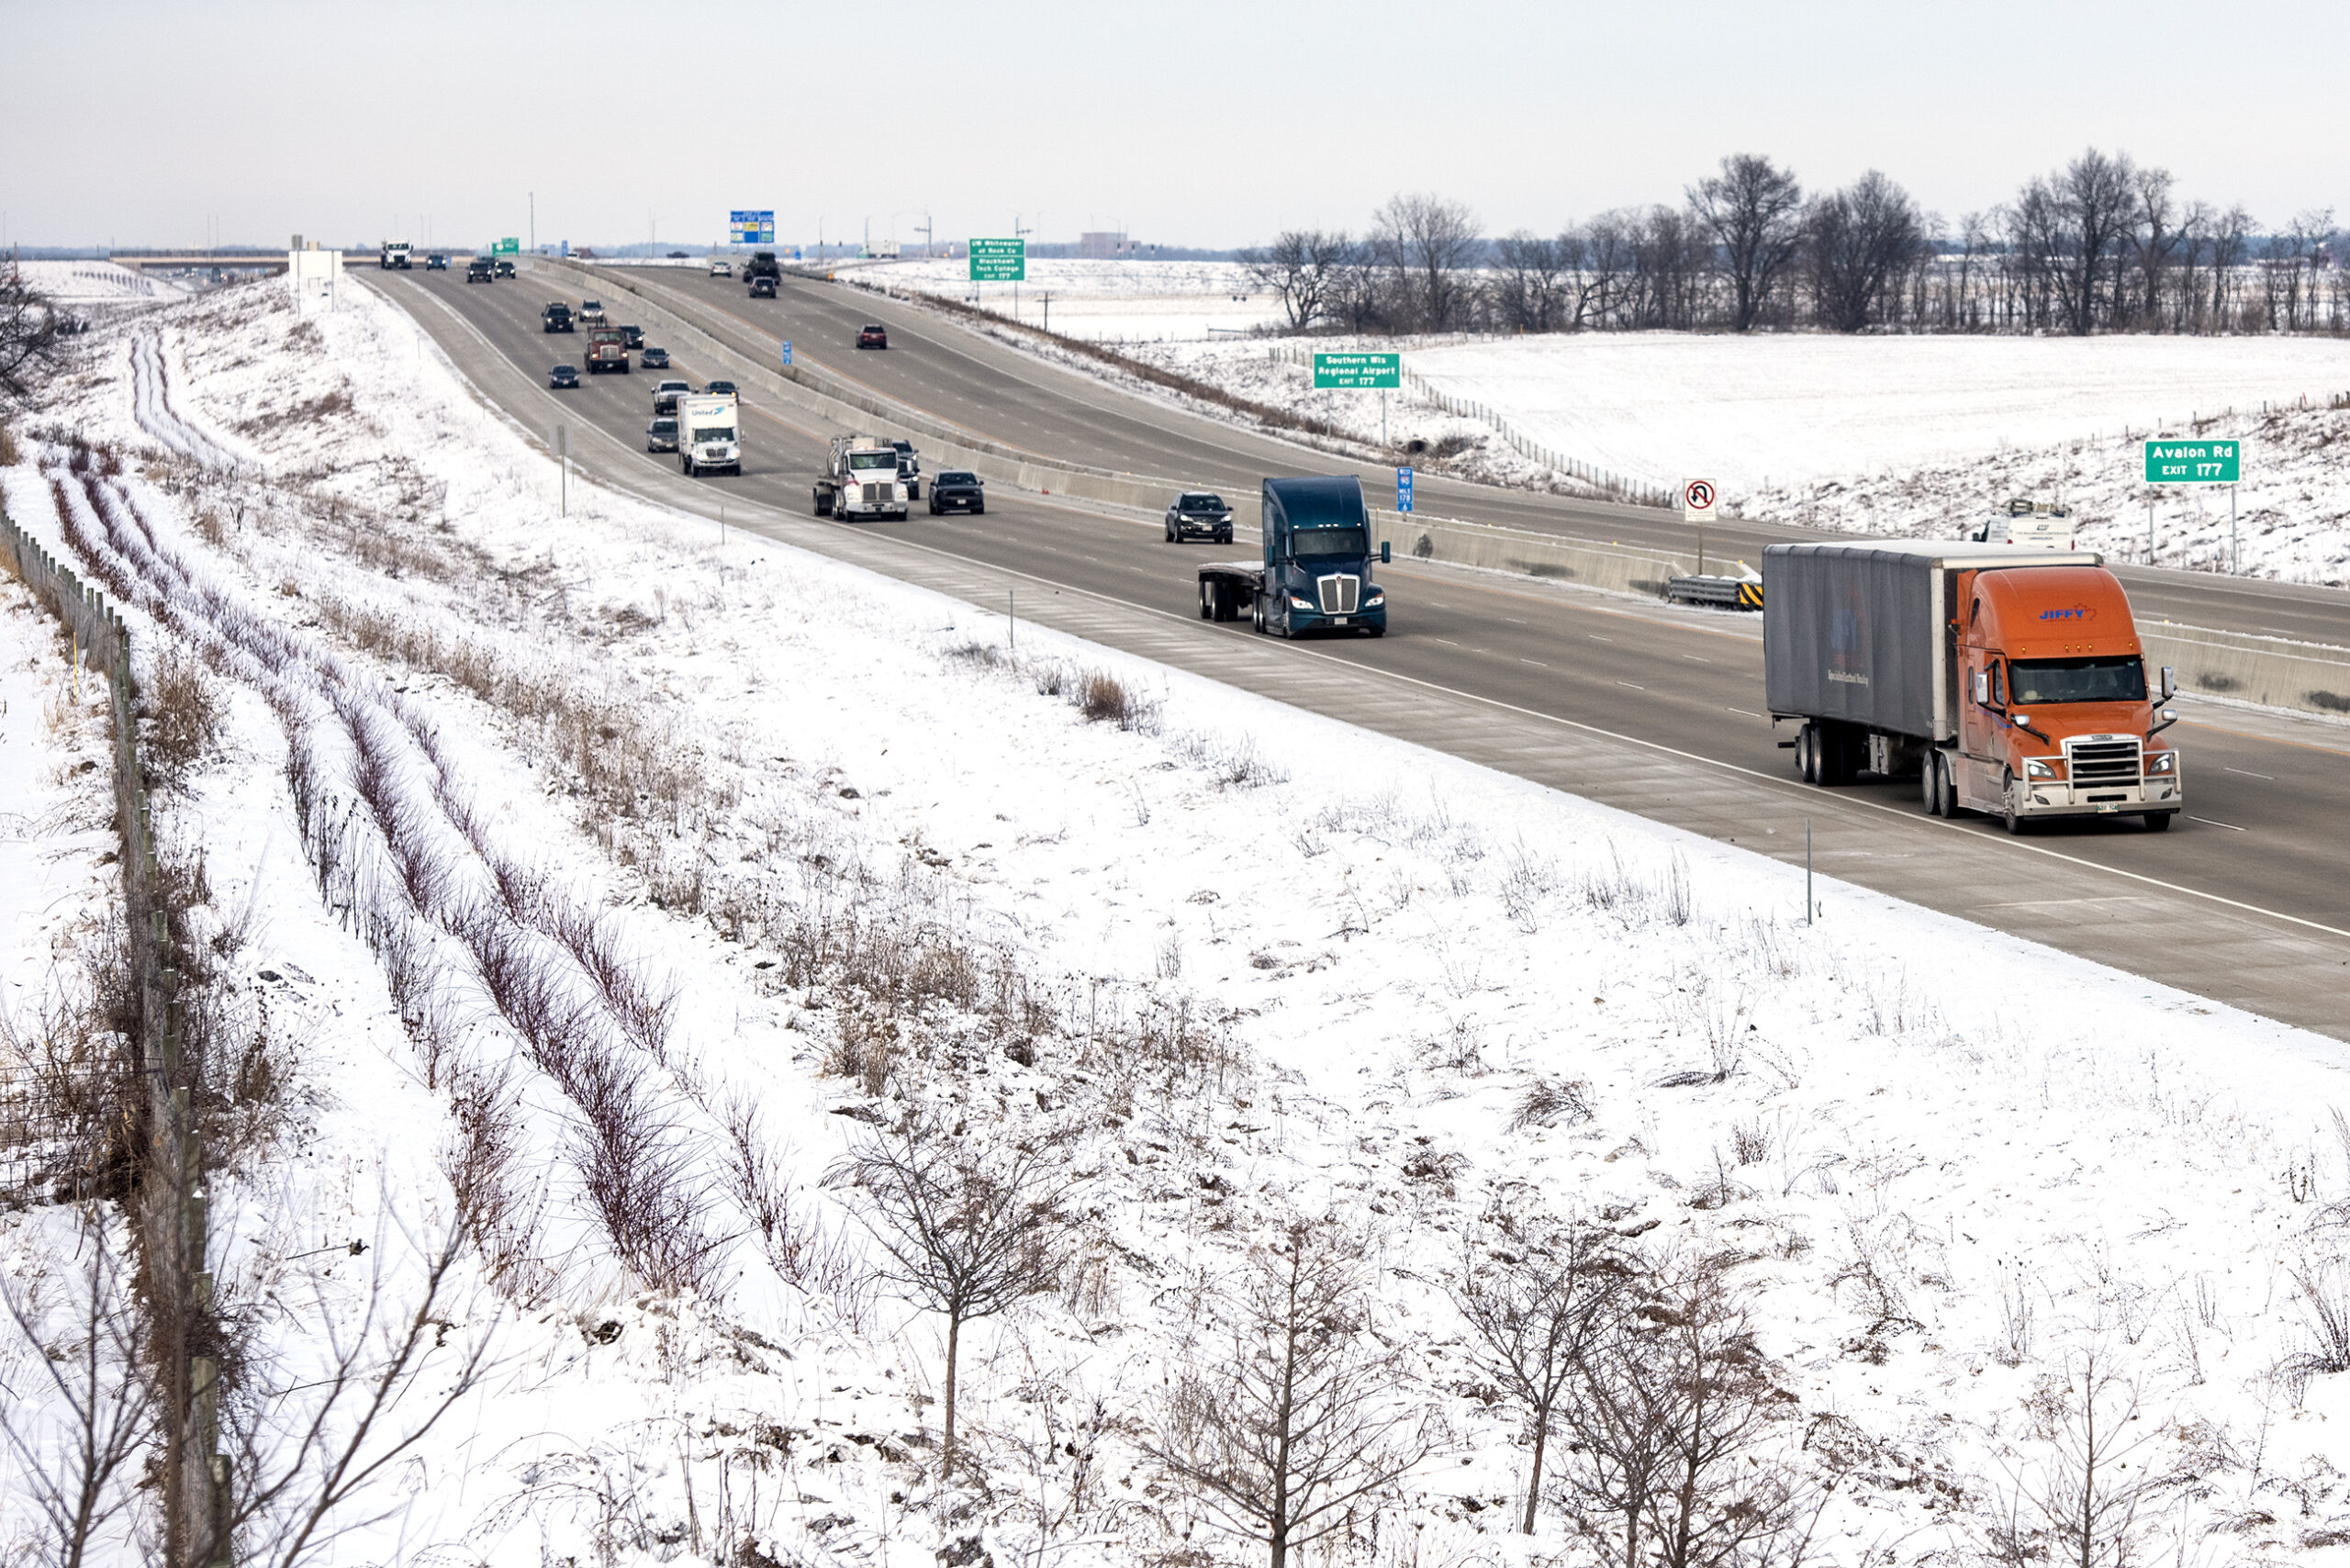 Cars and semis drive on an interstate highway past a snowy landscape.